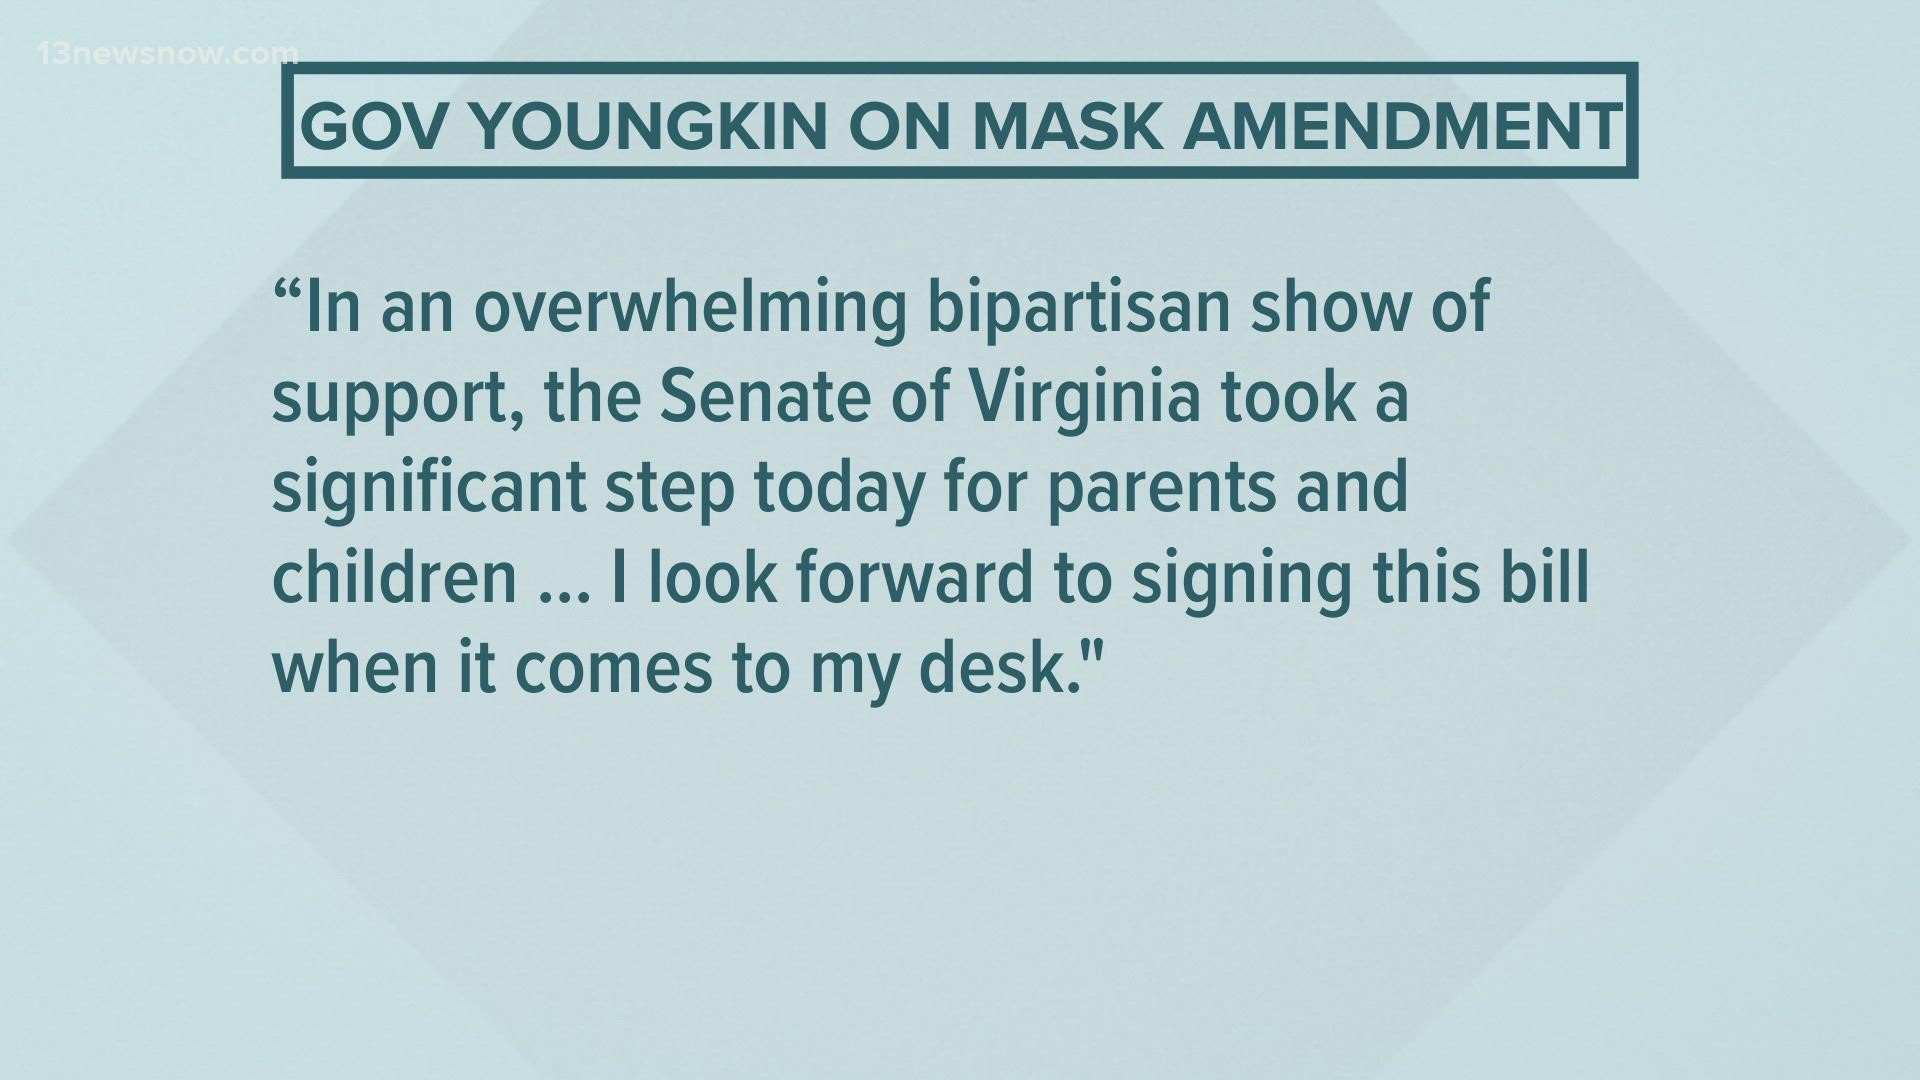 A bipartisan majority in the Virginia Senate has voted to advance legislation that would ban public school systems from imposing mask requirements on students.